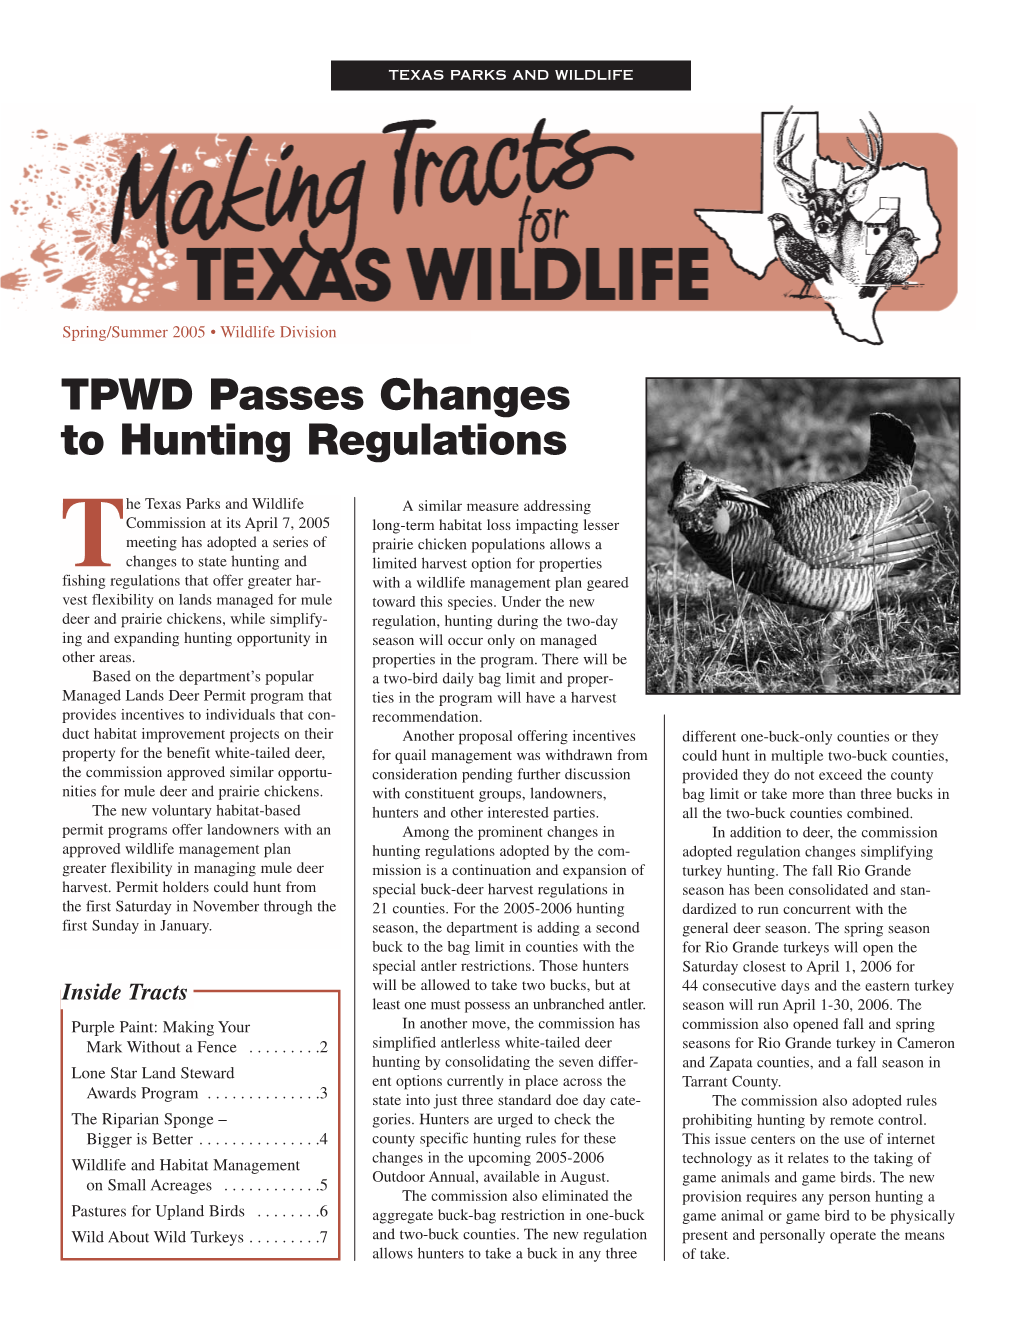 Spring/Summer 2005 • Wildlife Division TPWD Passes Changes to Hunting Regulations